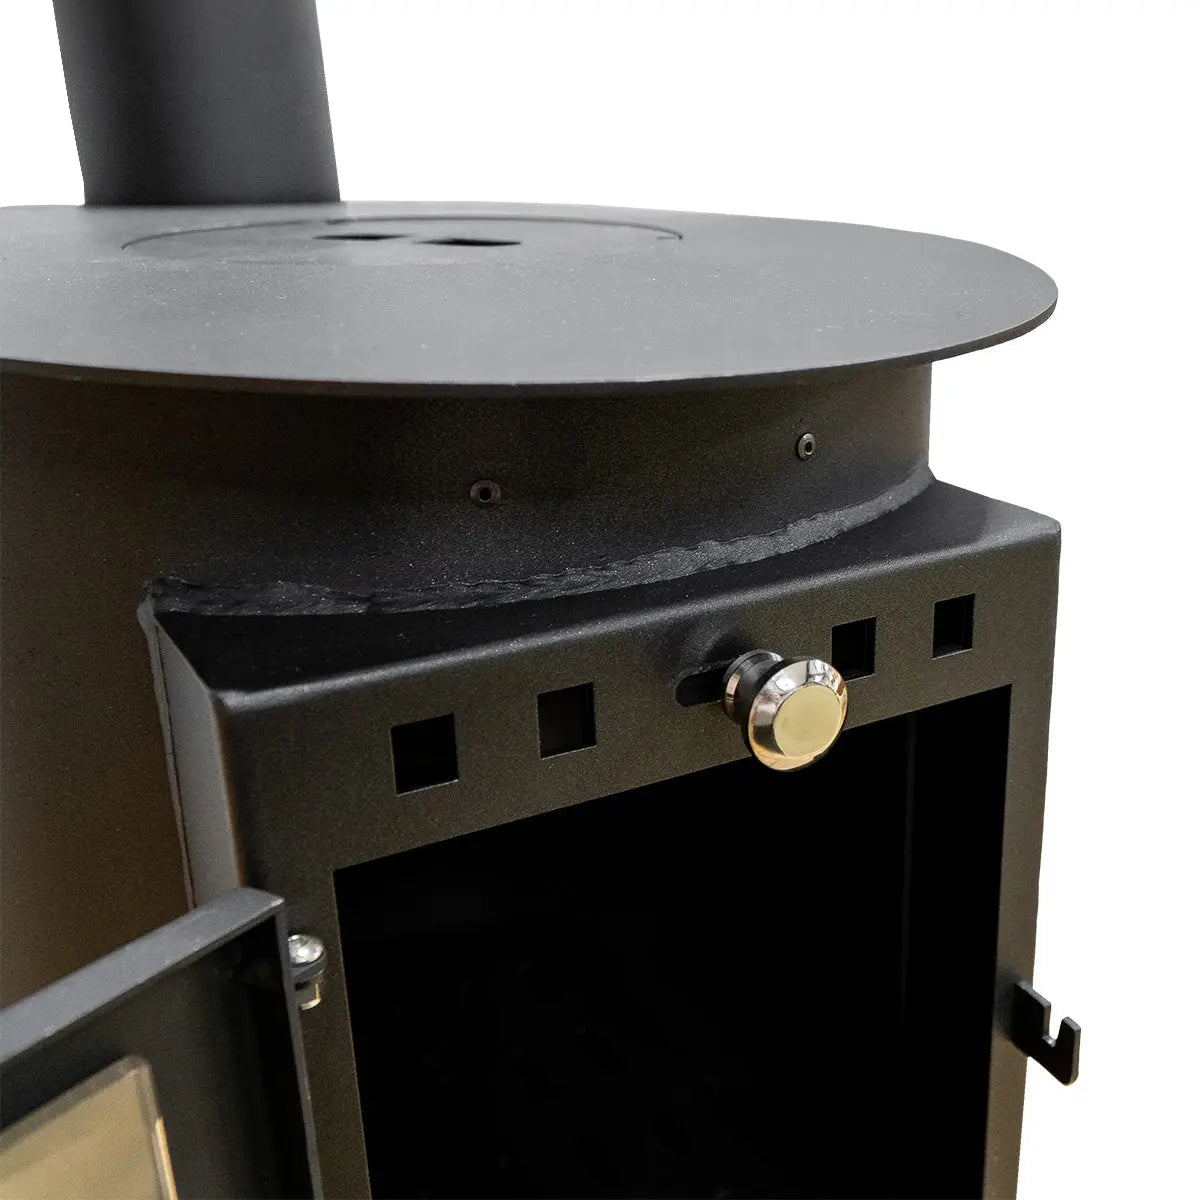 https://comps.countryliving.co.uk/competition/woodburningstove-231220.php